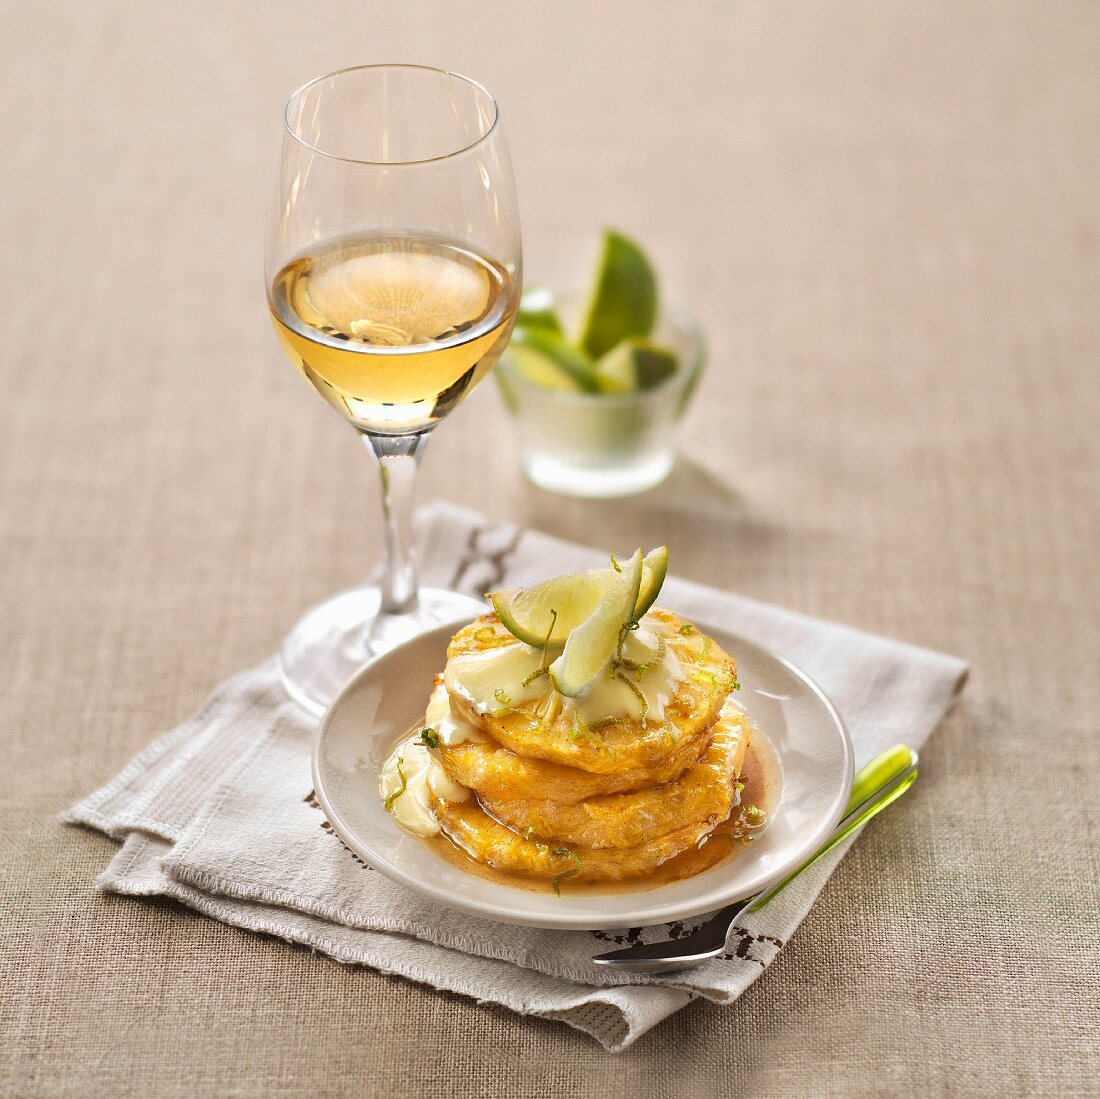 Roasted pineapple with hazelnut butter and thick lime cream, glass of sweet white wine